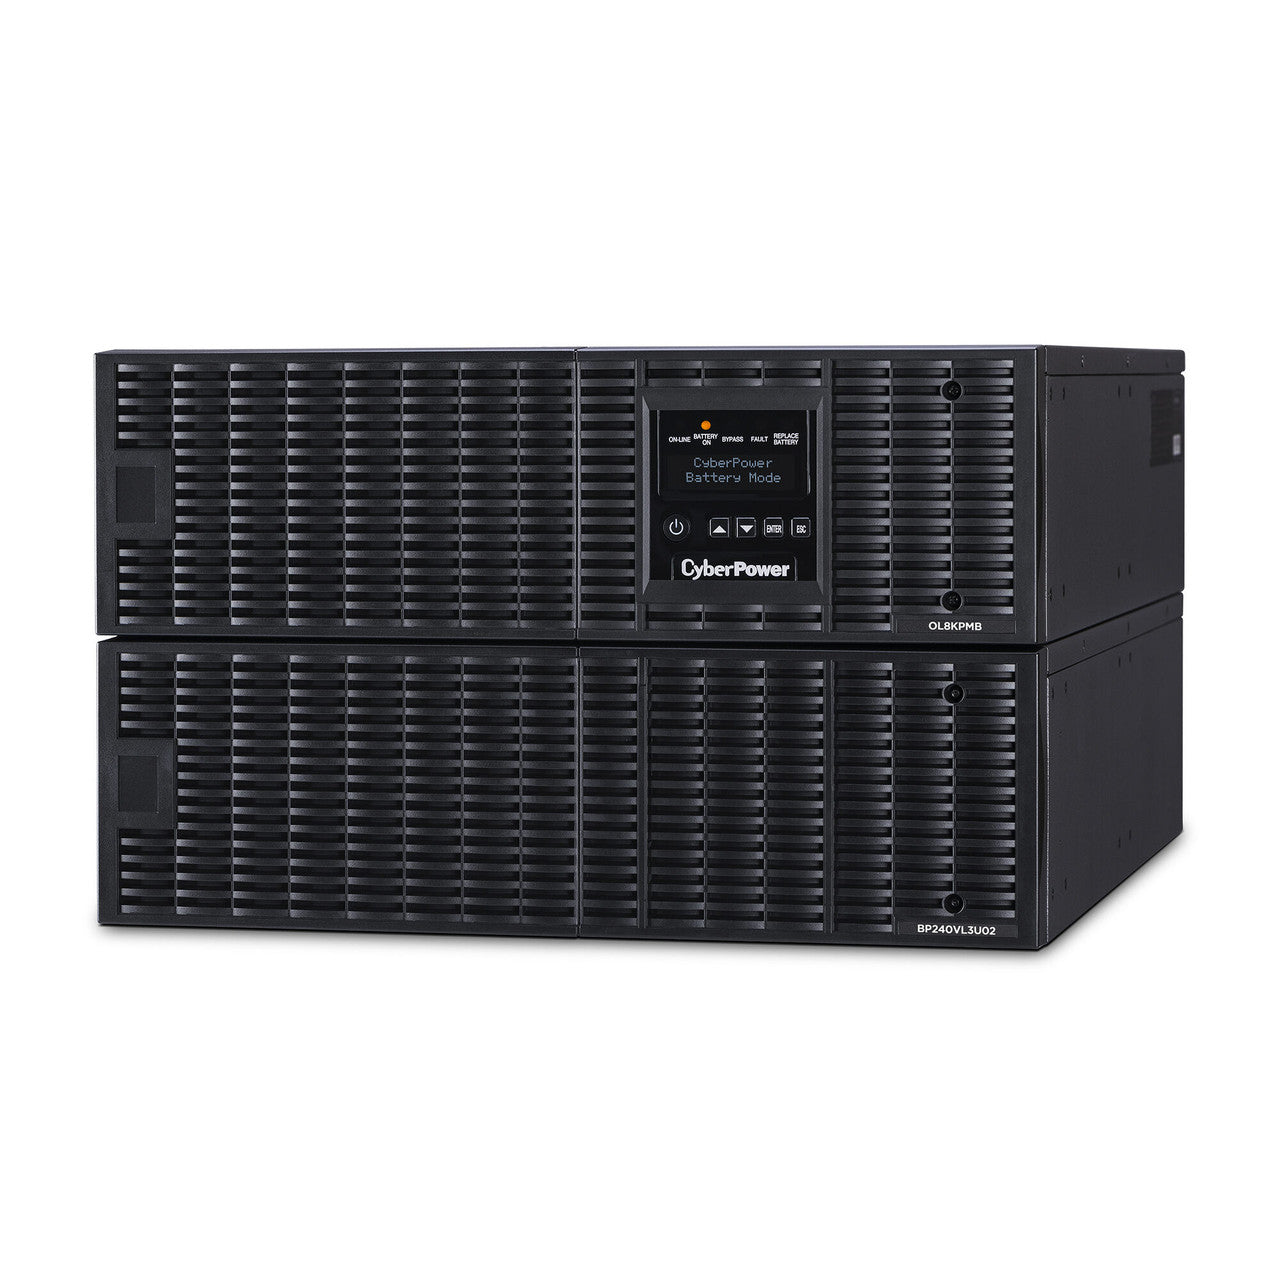 CyberPower OL8KRTHW 8KVA/8KW, online double-conversion UPS, PF=1, 6U rack/tower convertible